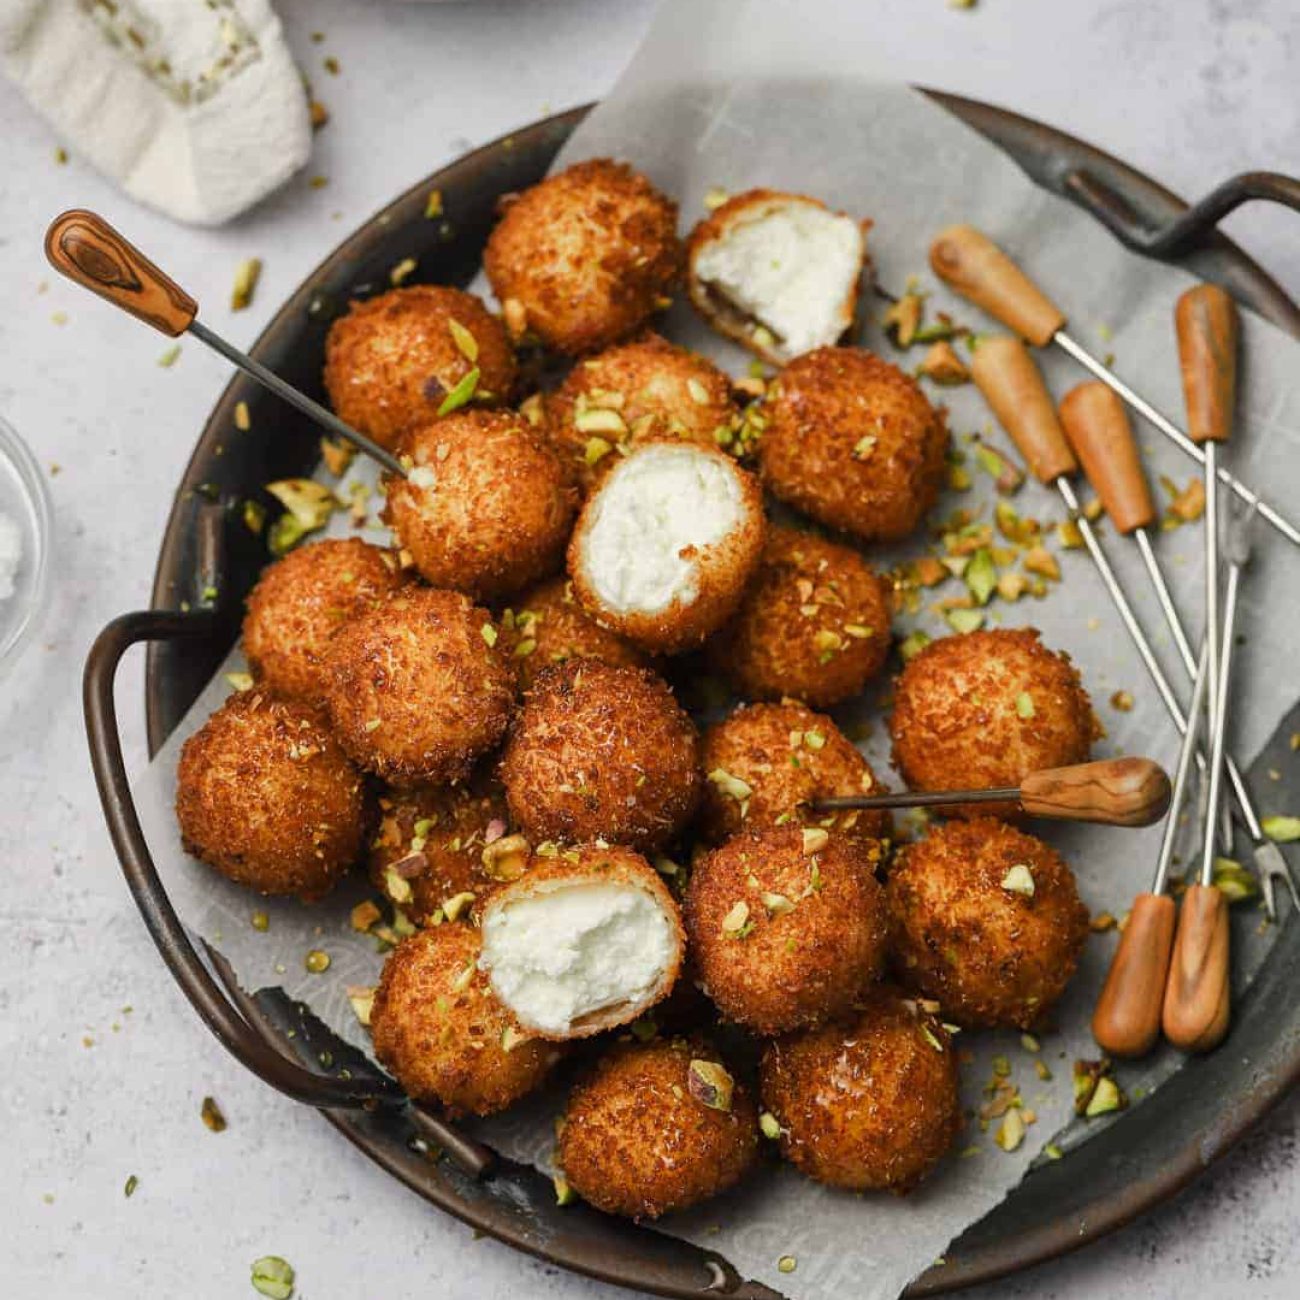 Fried Goat Cheese Appetizers